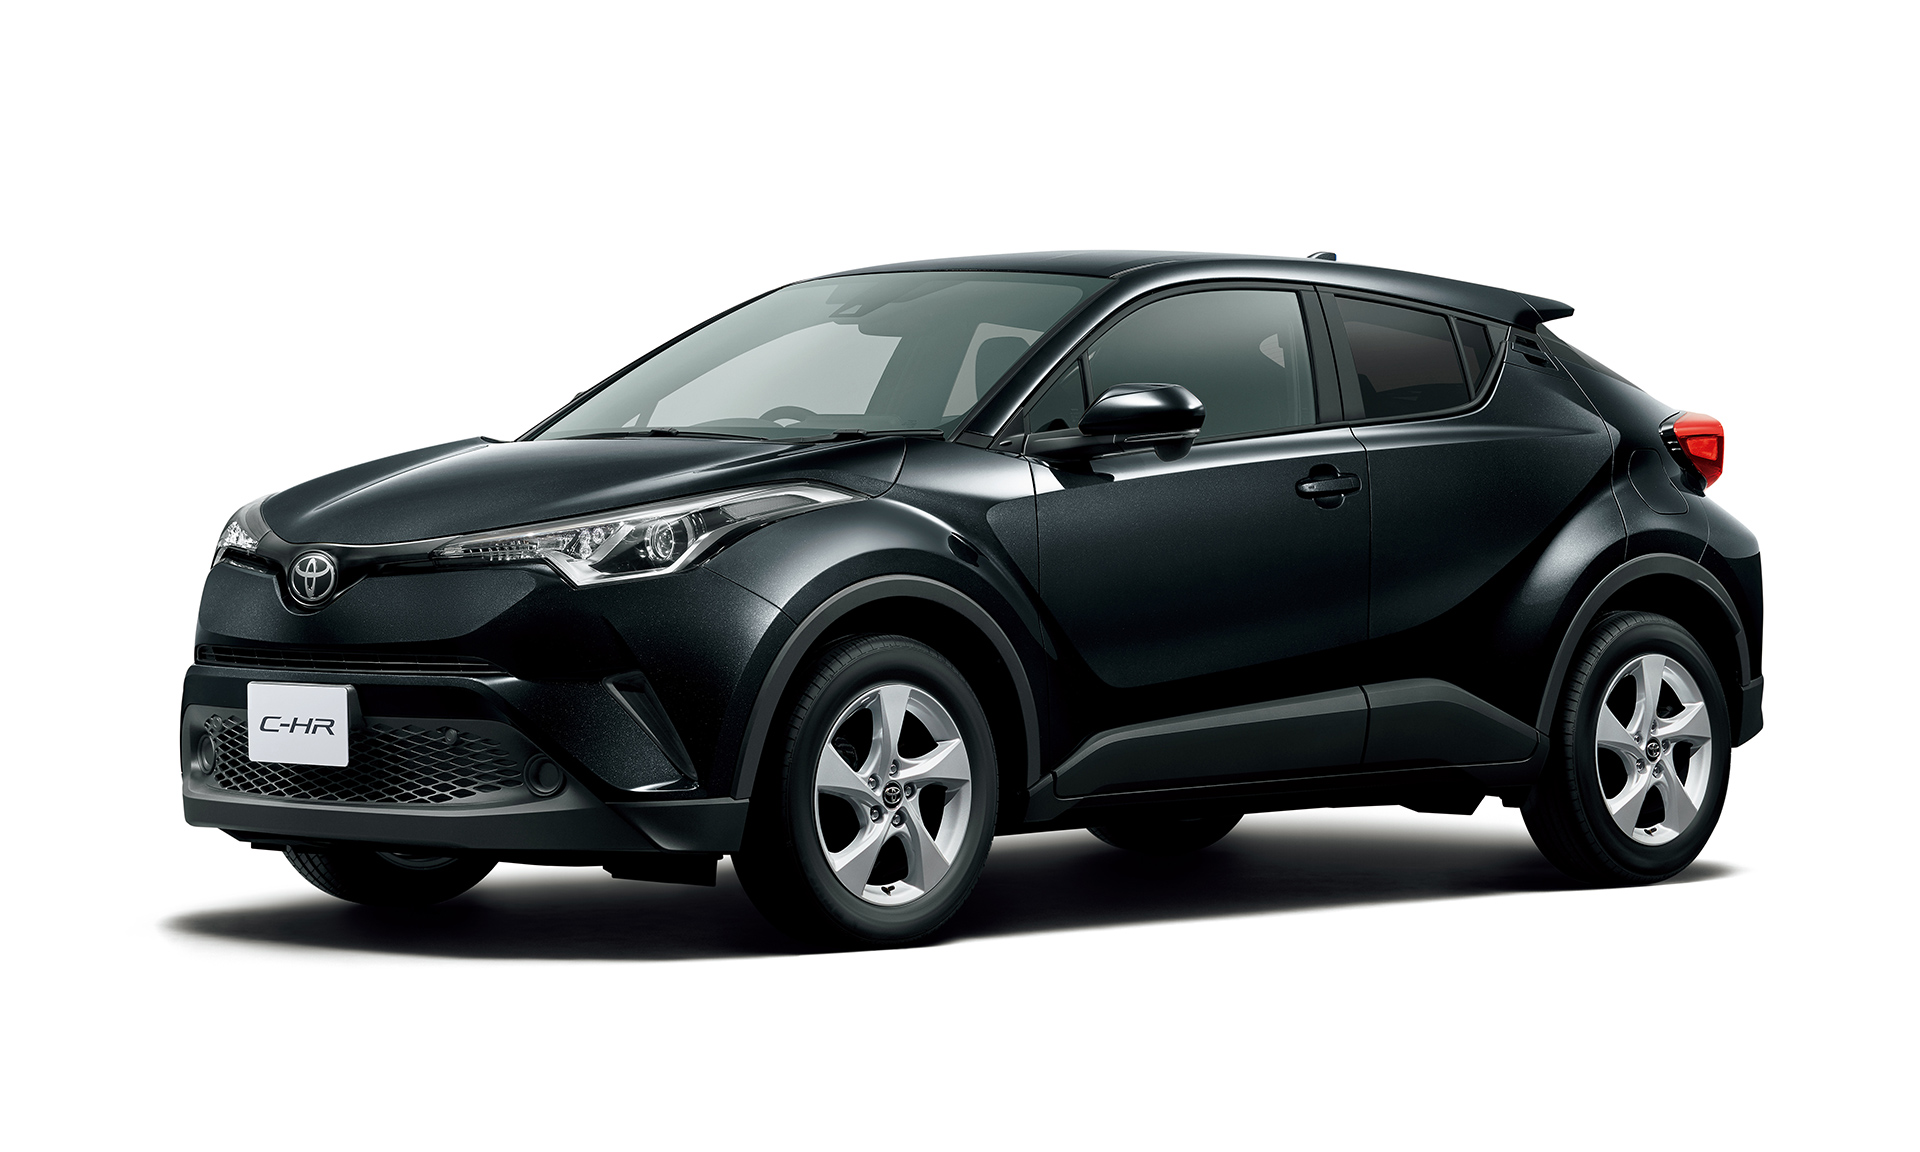 2020 Toyota C-HR Subcompact Crossover Features New Updates